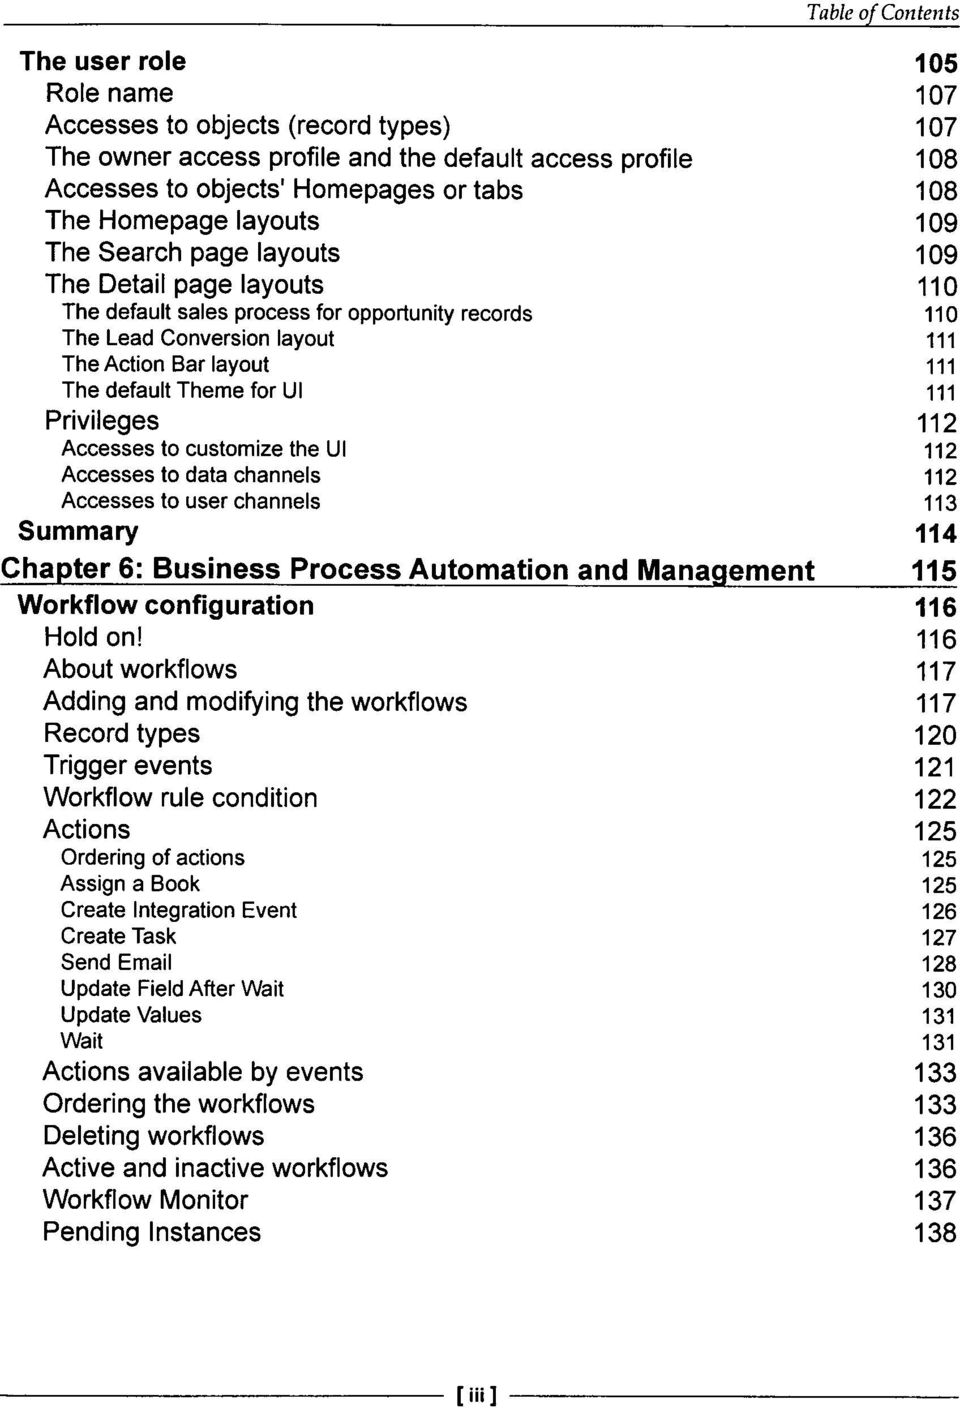 Privileges 112 Accesses to customize the Ul 112 Accesses to data channels 112 Accesses to user channels 113 Summary 114 Chapter 6: Business Process Automation and Management 115 Workflow